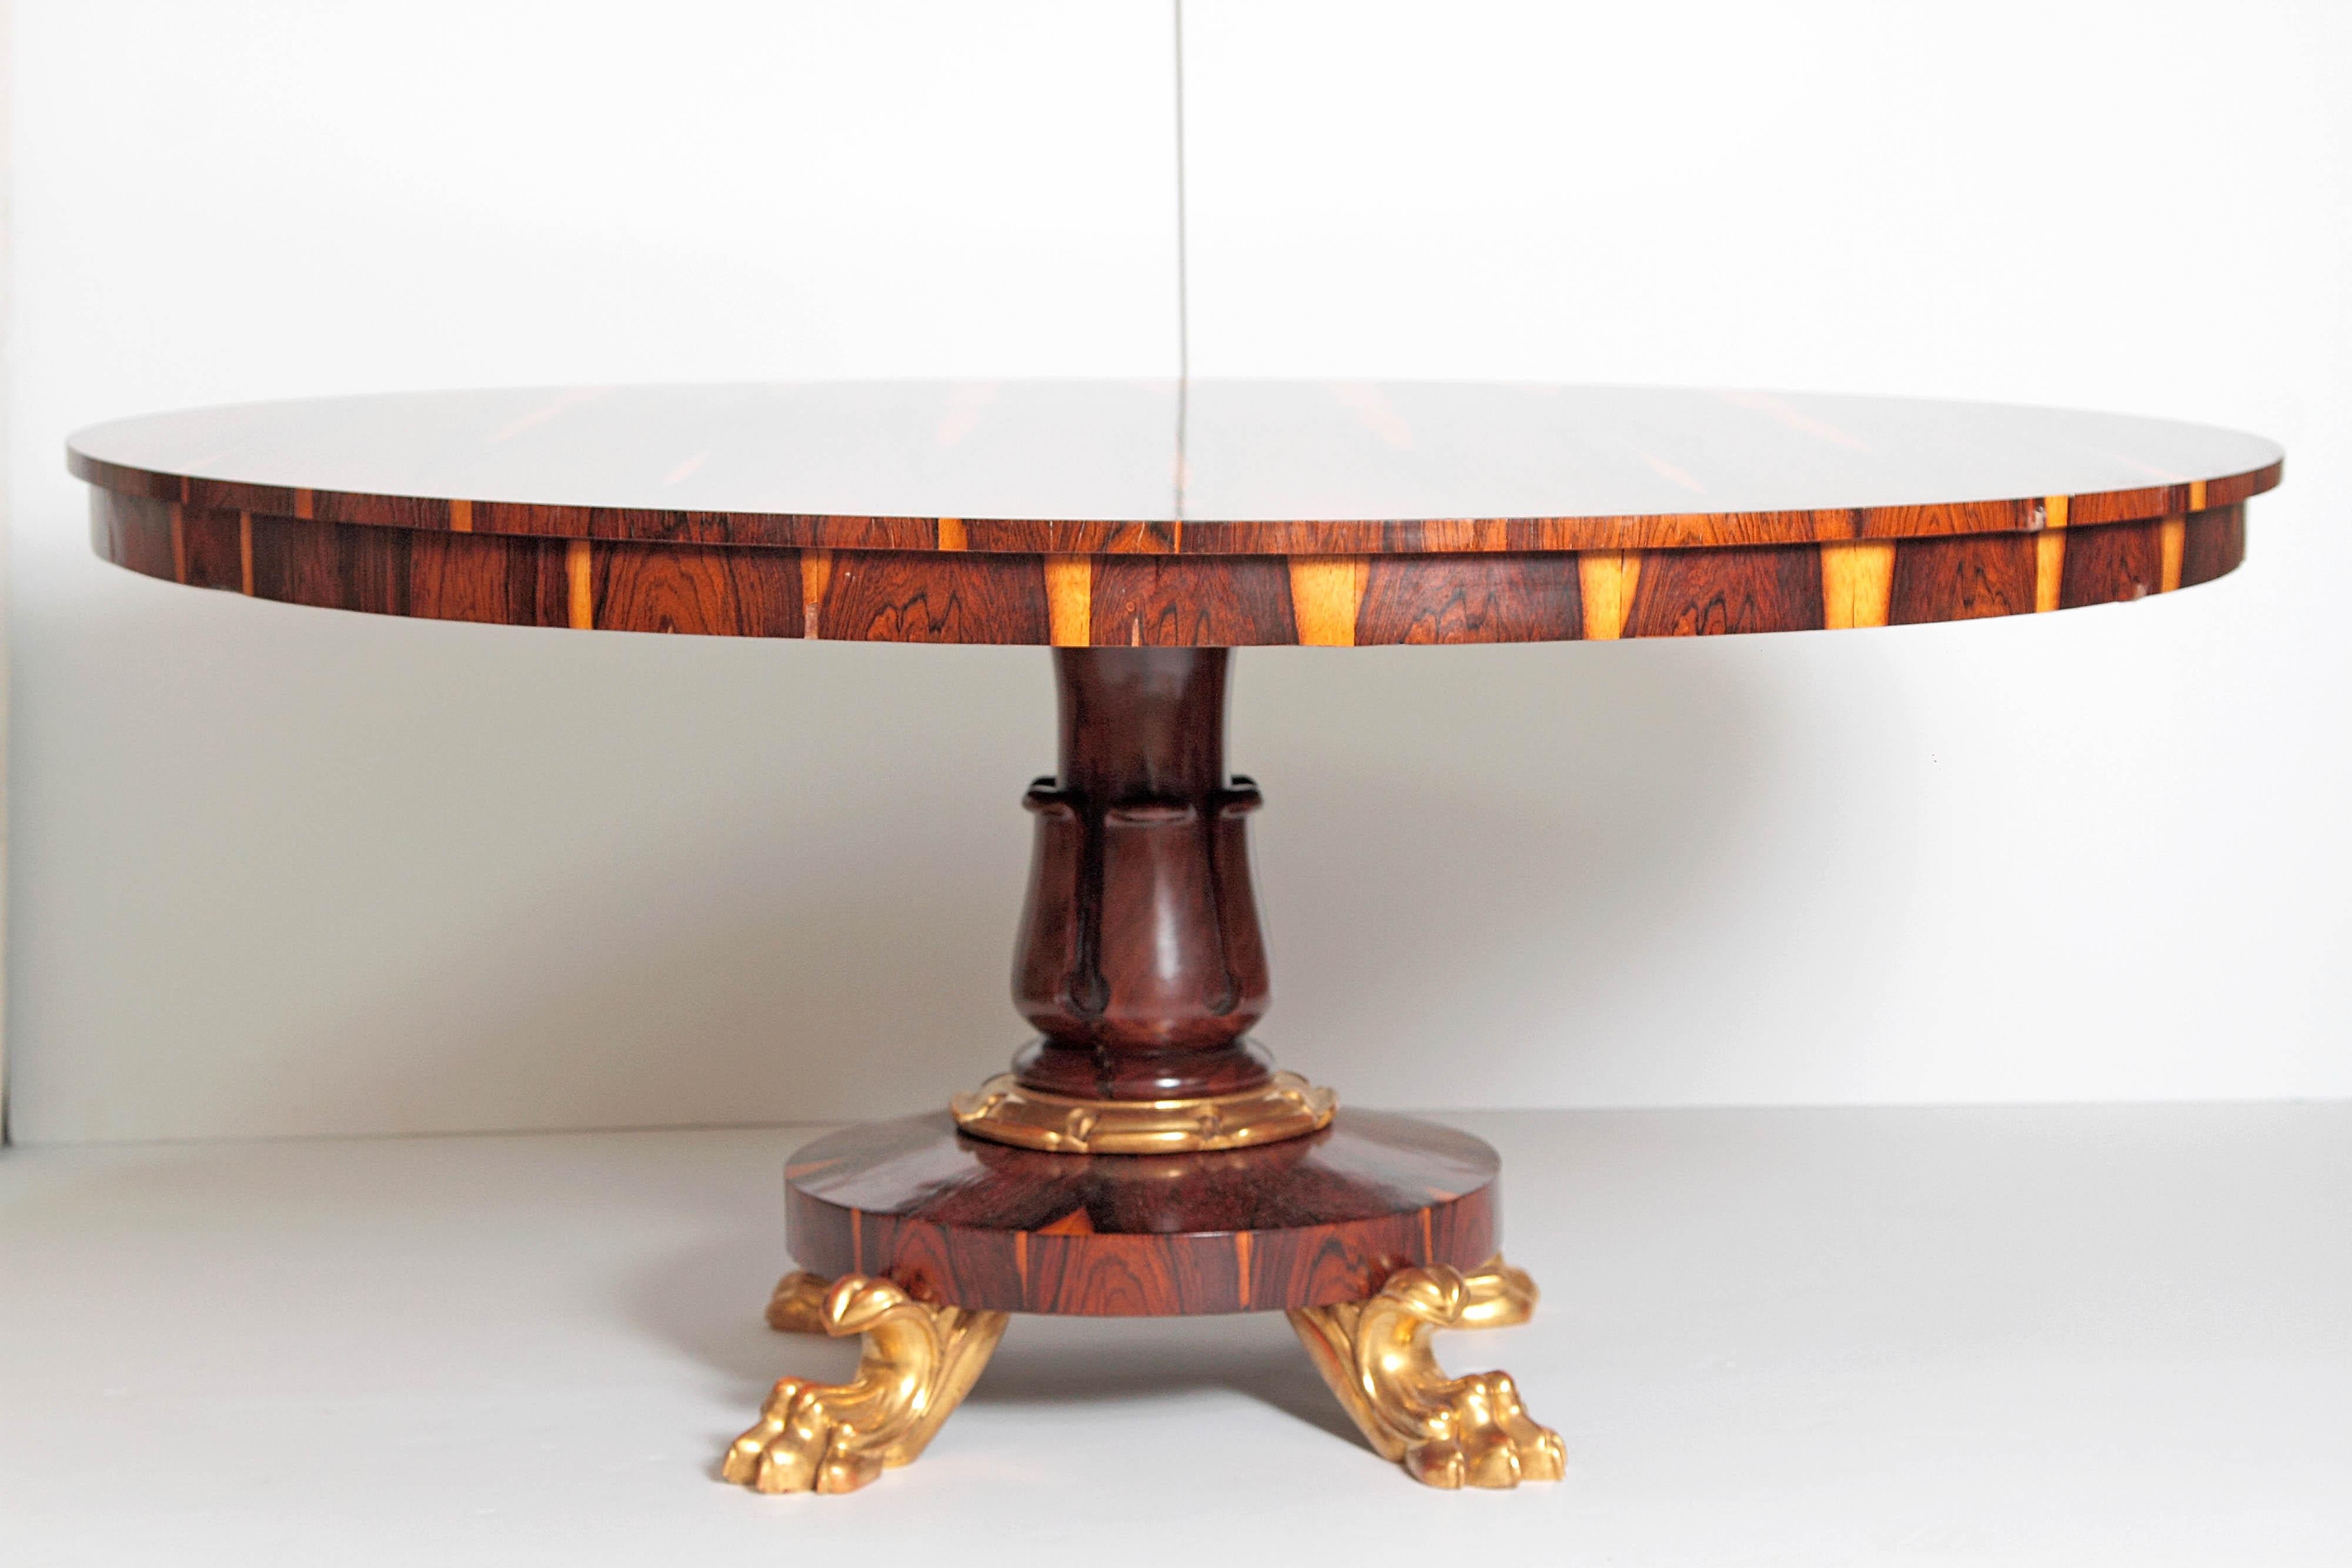 An impressive looking large Regency center table of calamander wood. A beautifully patterned top with carved pedestal base with gilt band above round base with four gilt lion paw feet. Early 19th century, circa 1820, England.